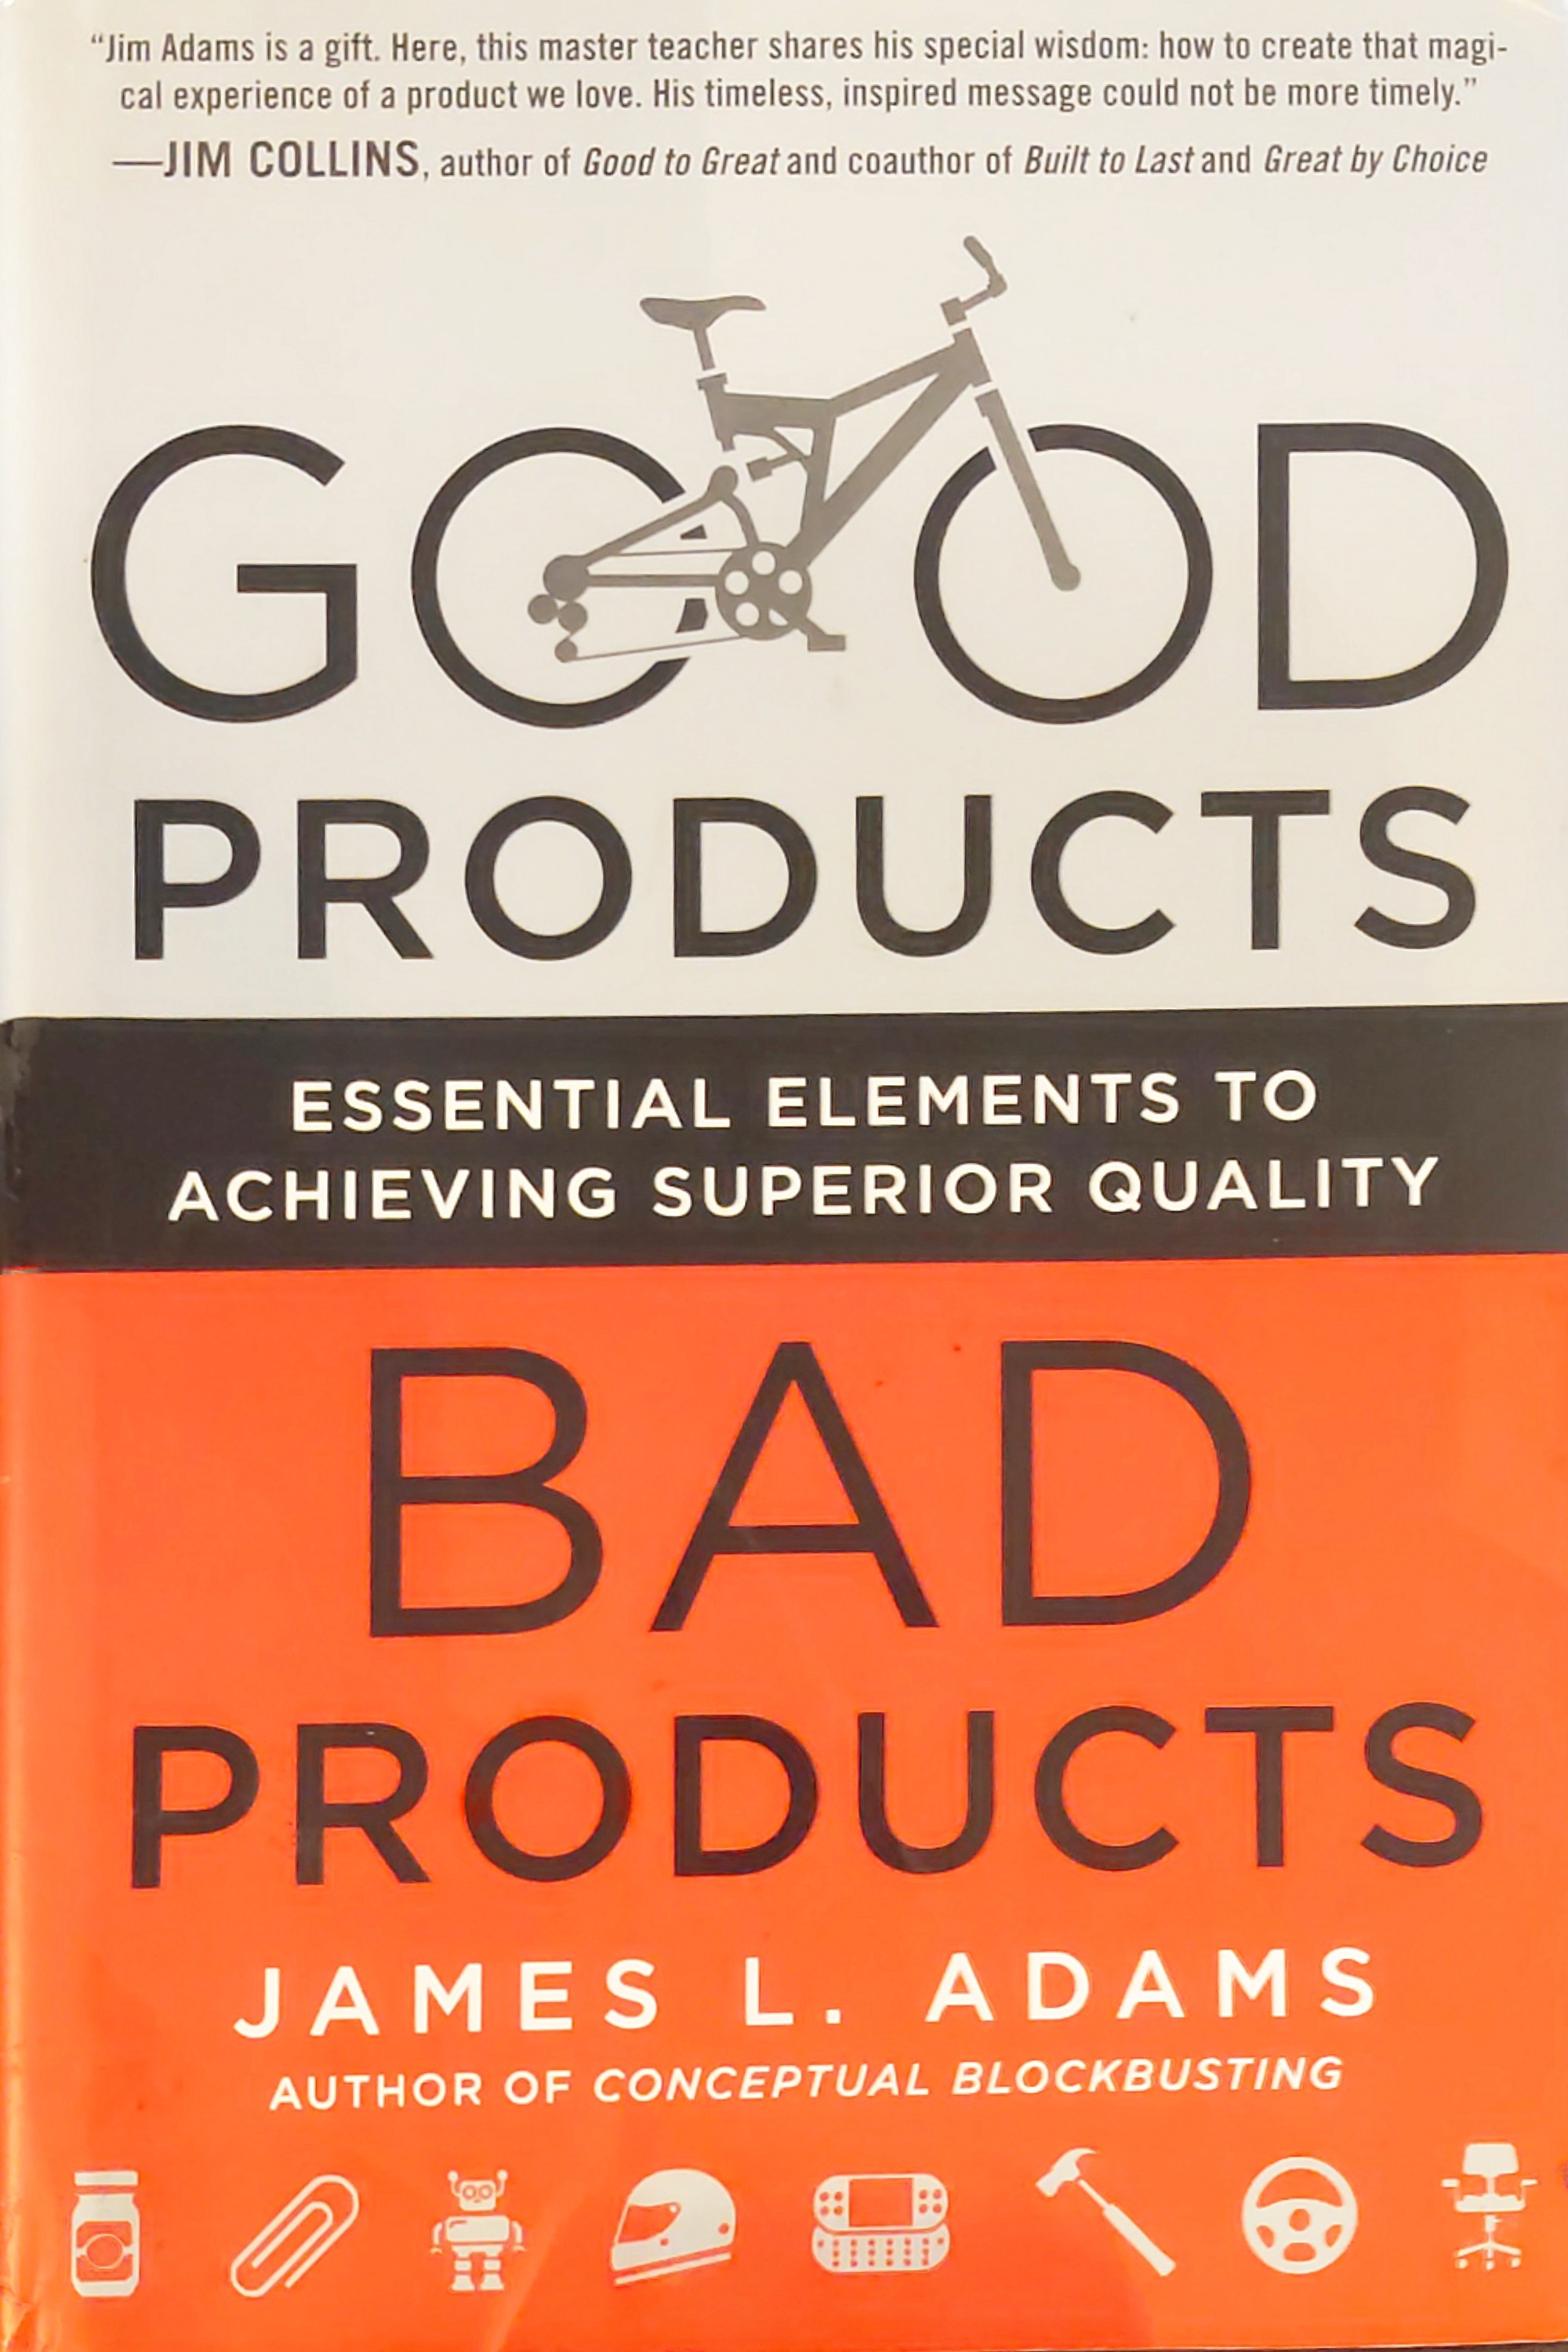 Good products, bad products (2012, McGraw-Hill)